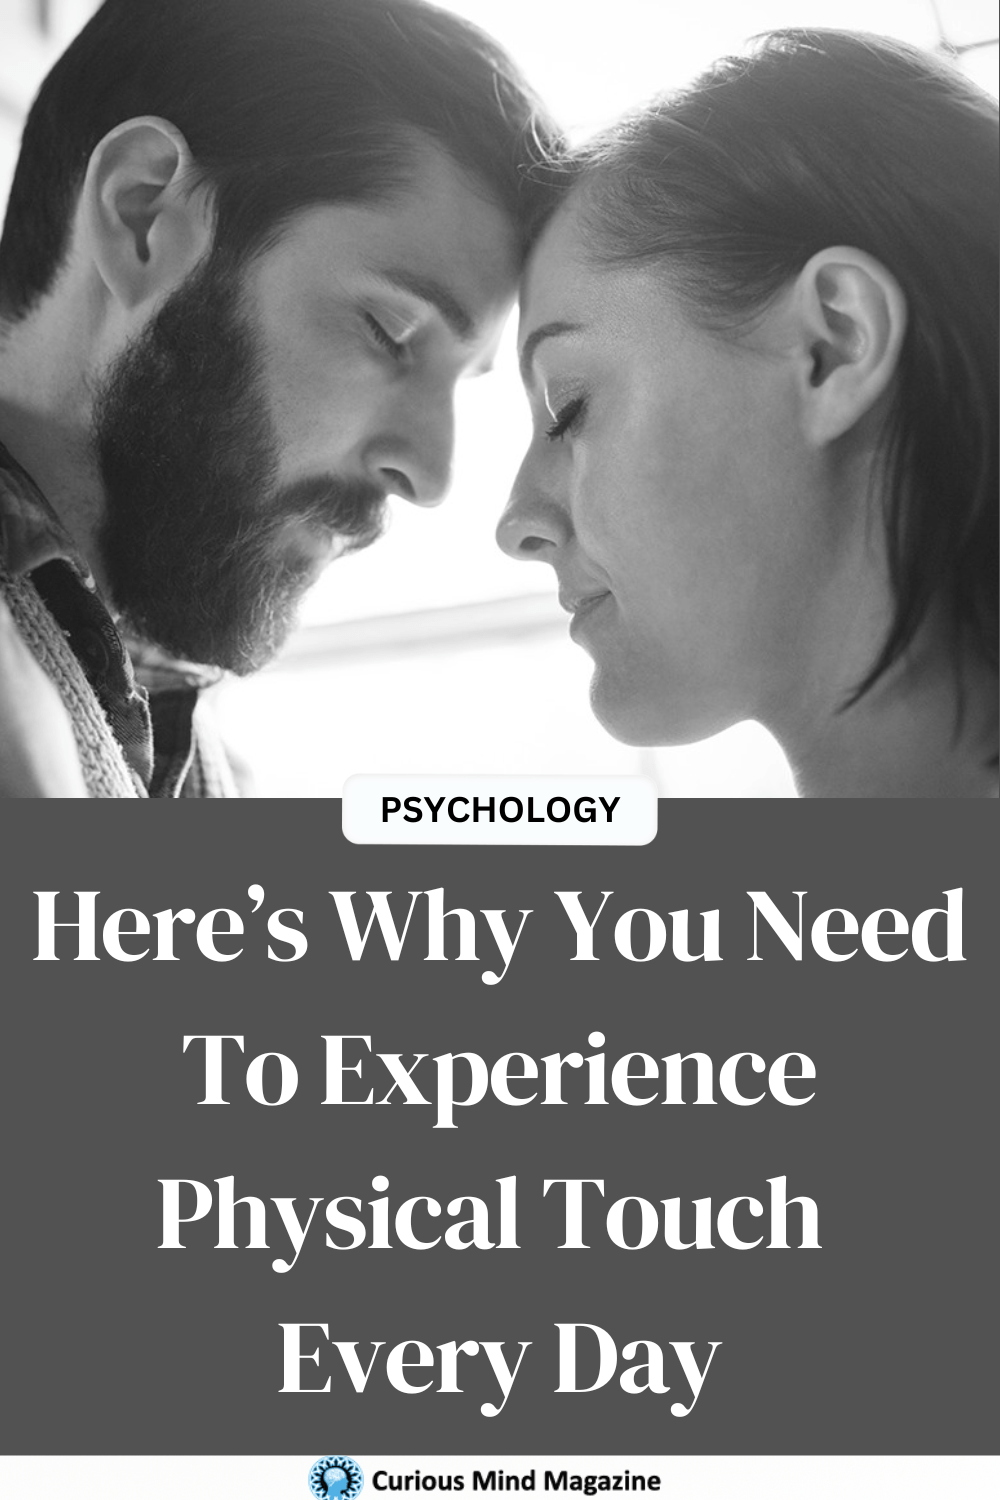 Here’s Why You Need To Experience Physical Touch Every Day